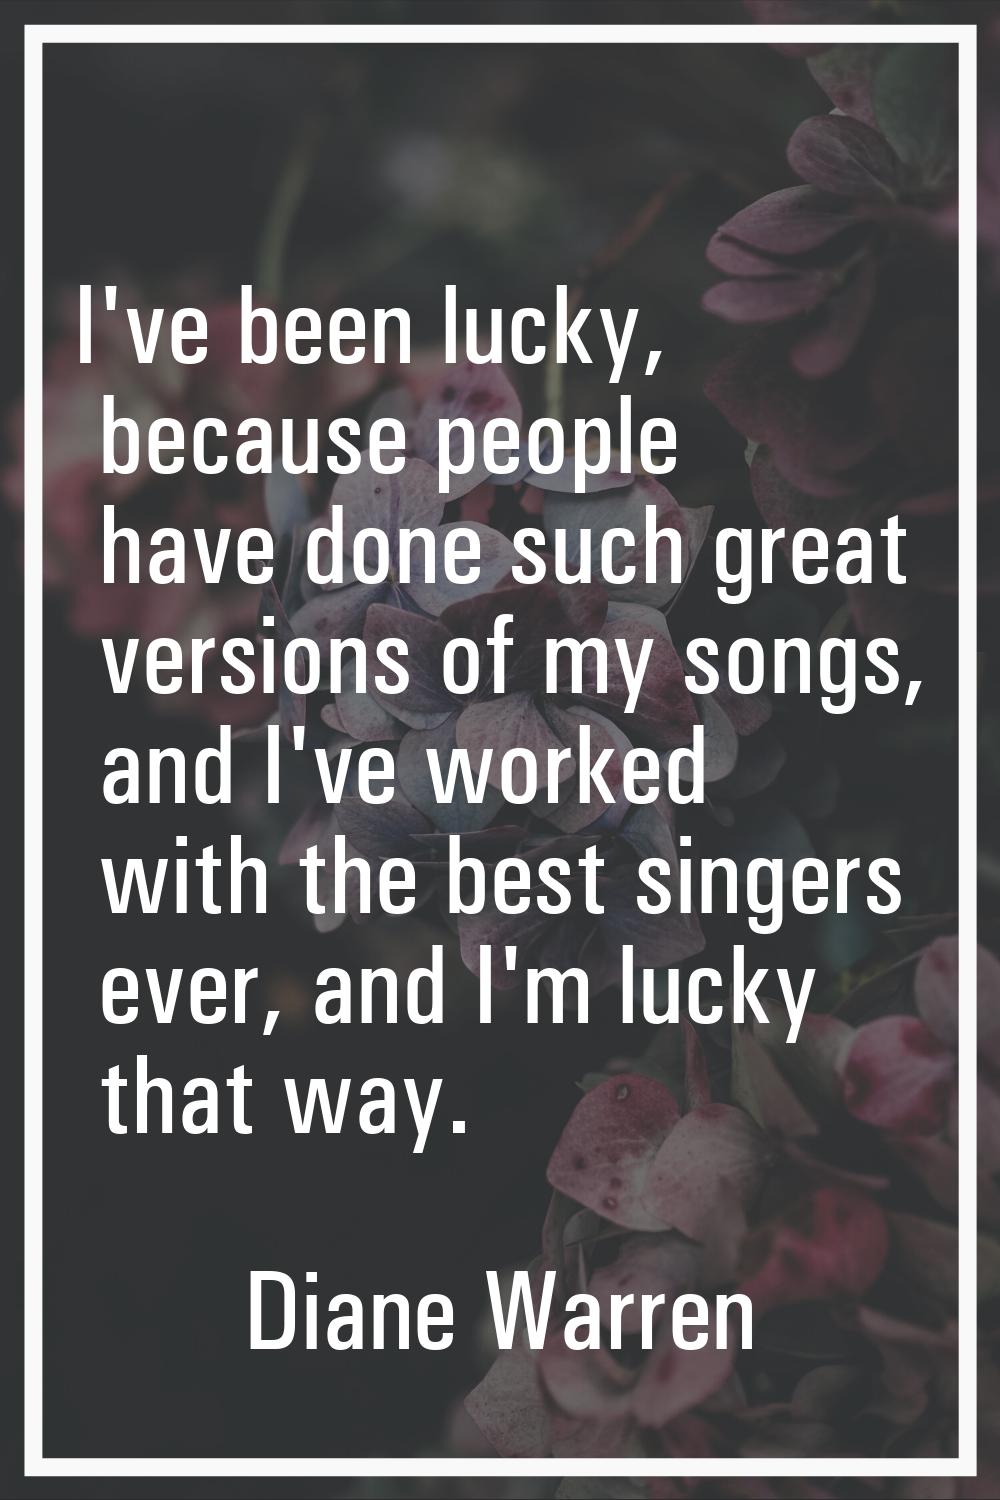 I've been lucky, because people have done such great versions of my songs, and I've worked with the